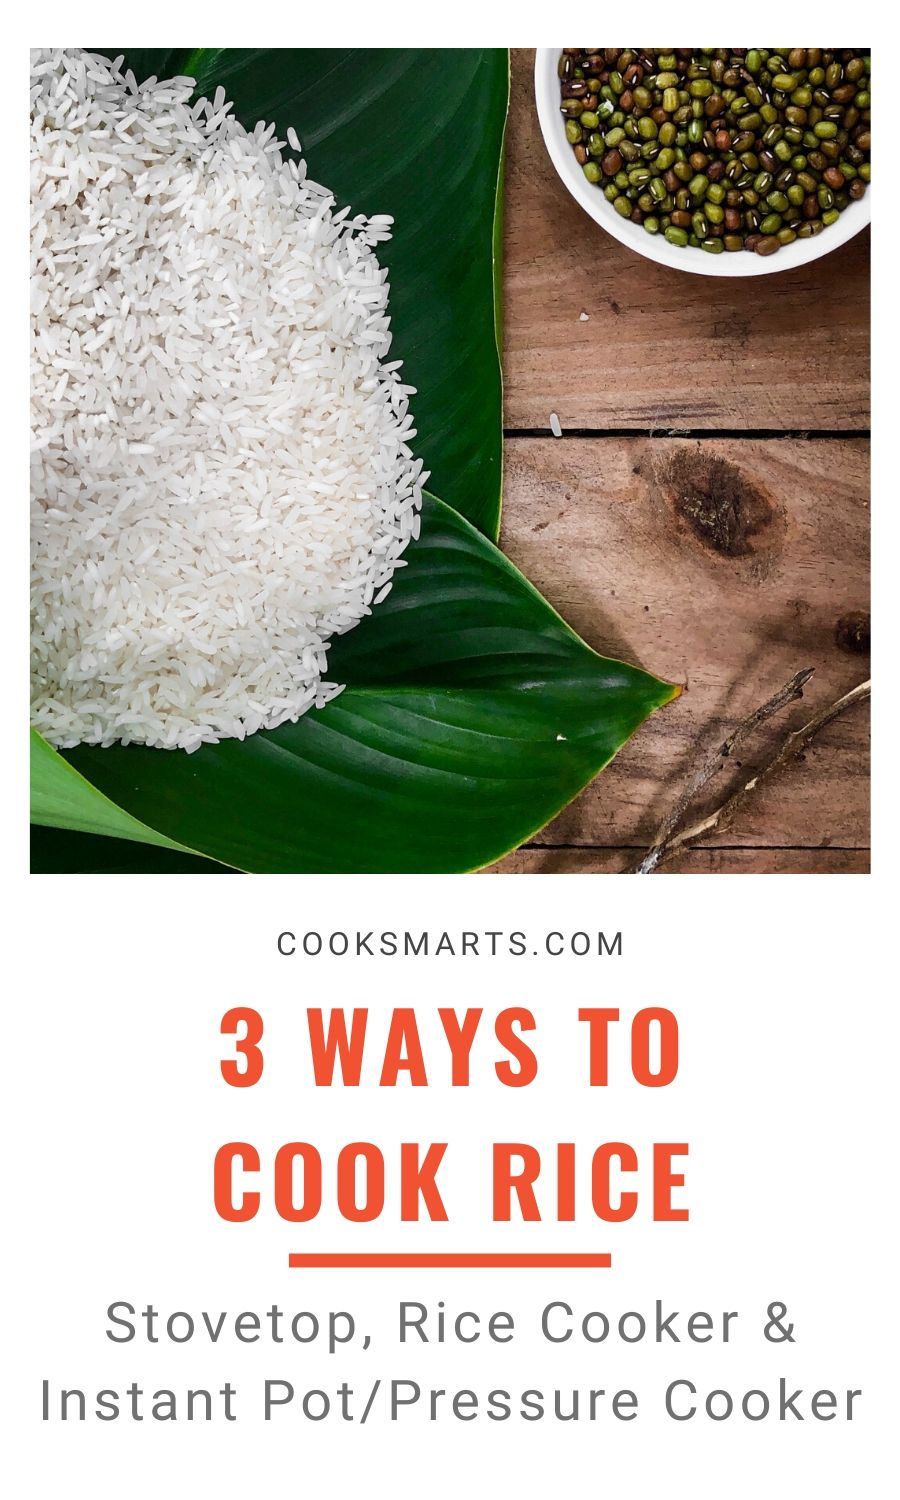 How to Cook Rice | Cook Smarts